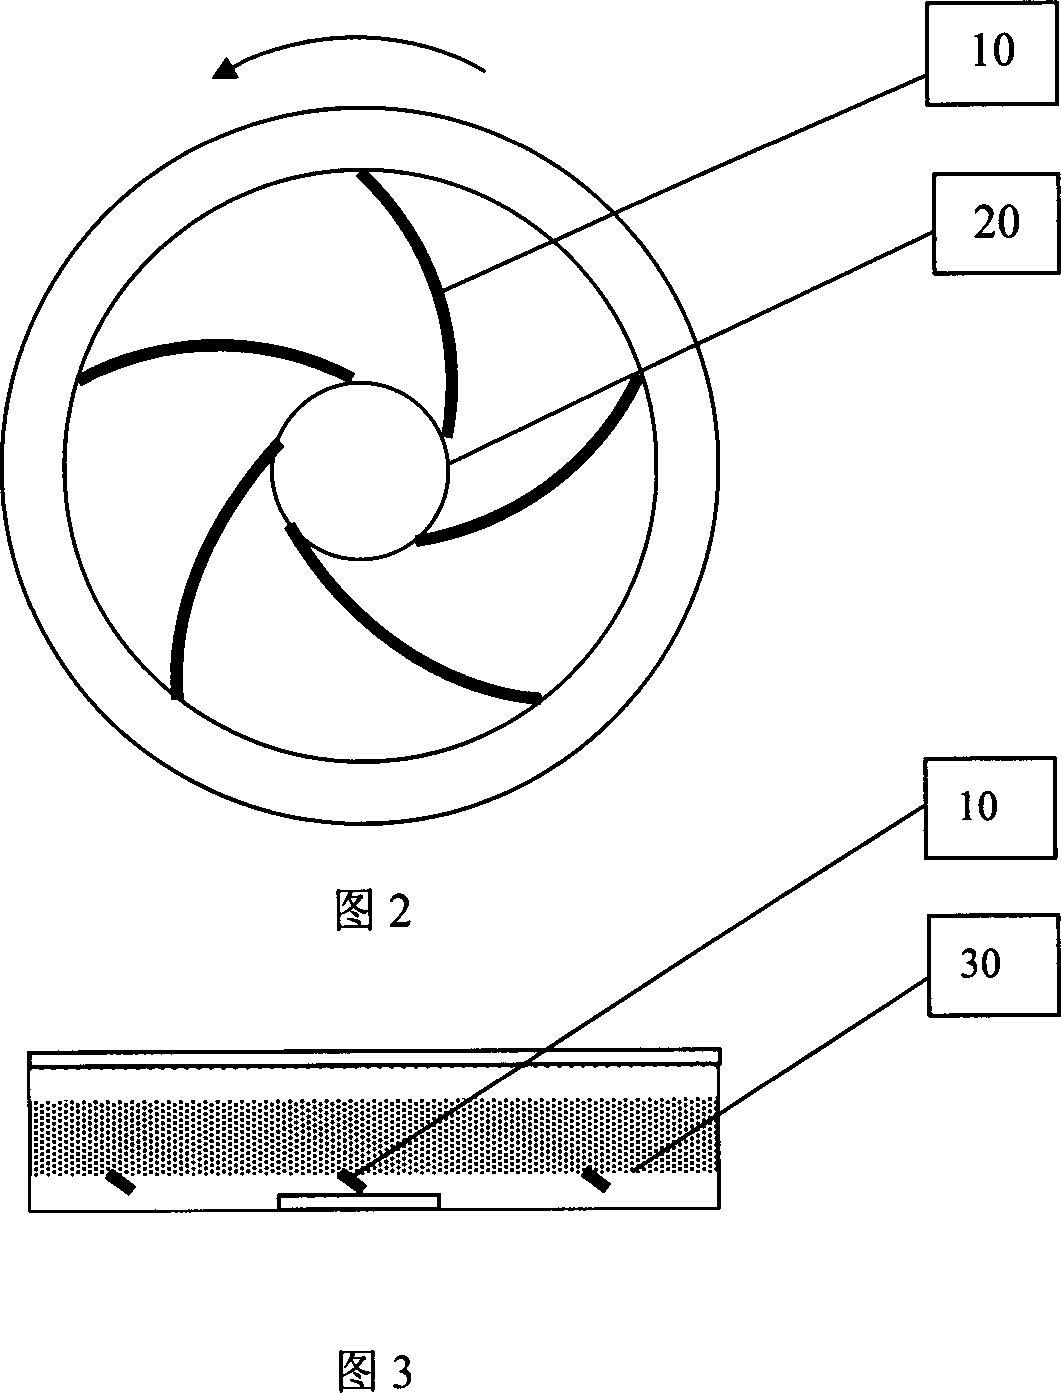 Centrifugal disc for producing glass wool